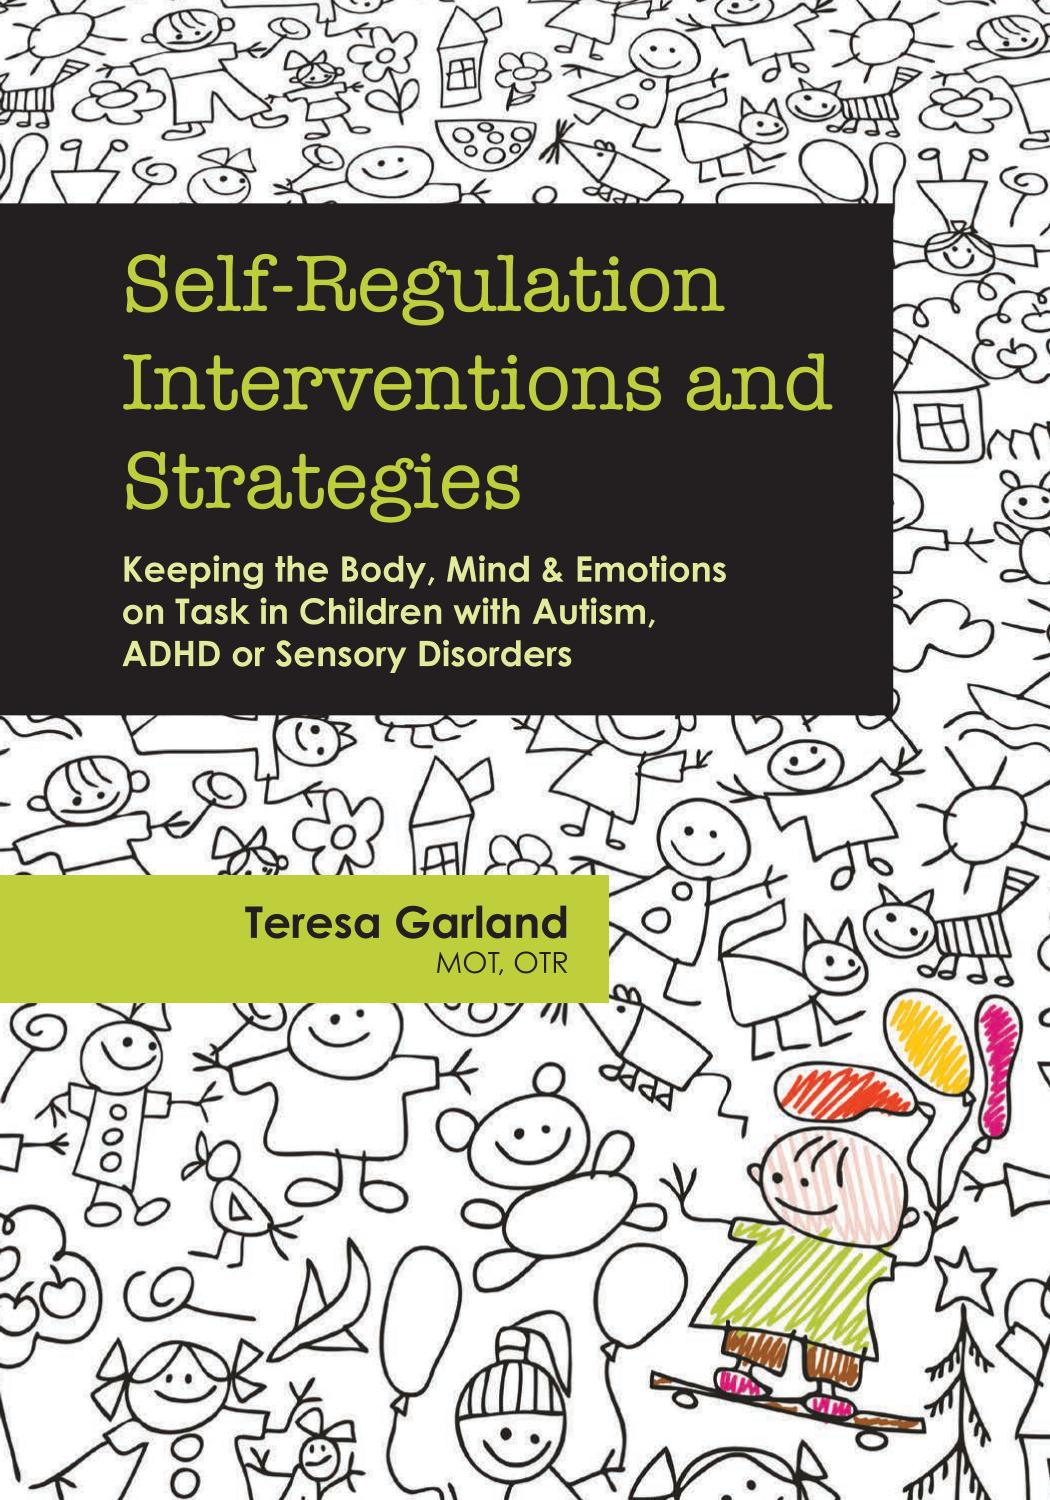 Self-Regulation Interventions and Strategies: Keeping the Body, Mind and Emotions on Task in Children with Autism, ADHD or Sensory Disorders by Teresa Garland